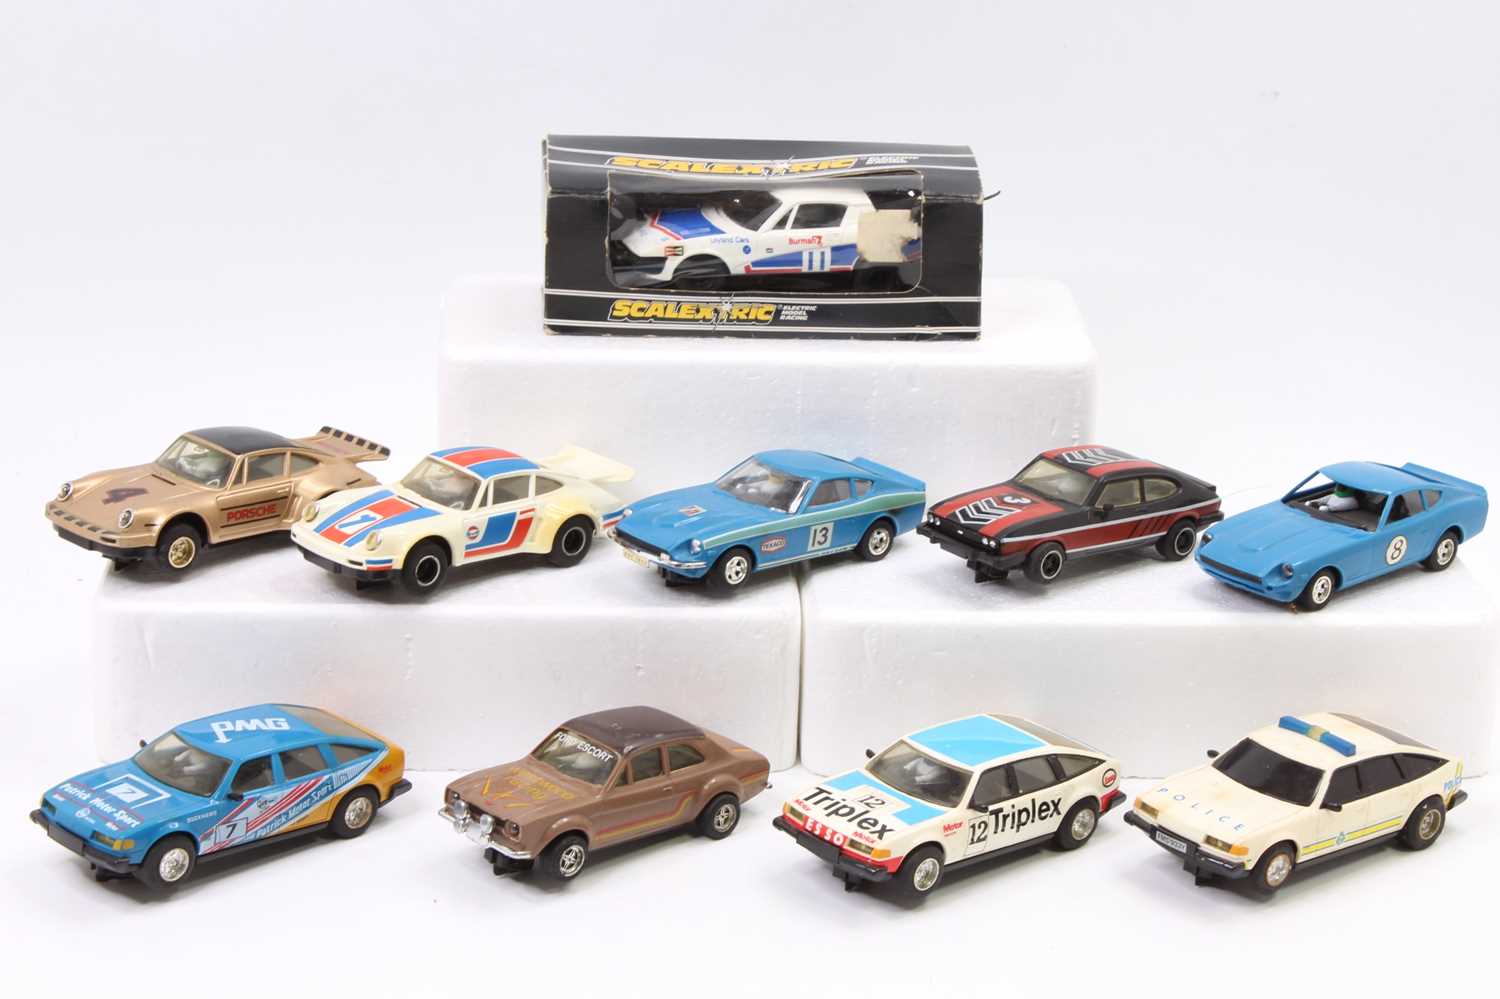 10 various Scalextric slot cars including Ford Escort, Rover 3500, Porsche Turbo, Ford Capri and